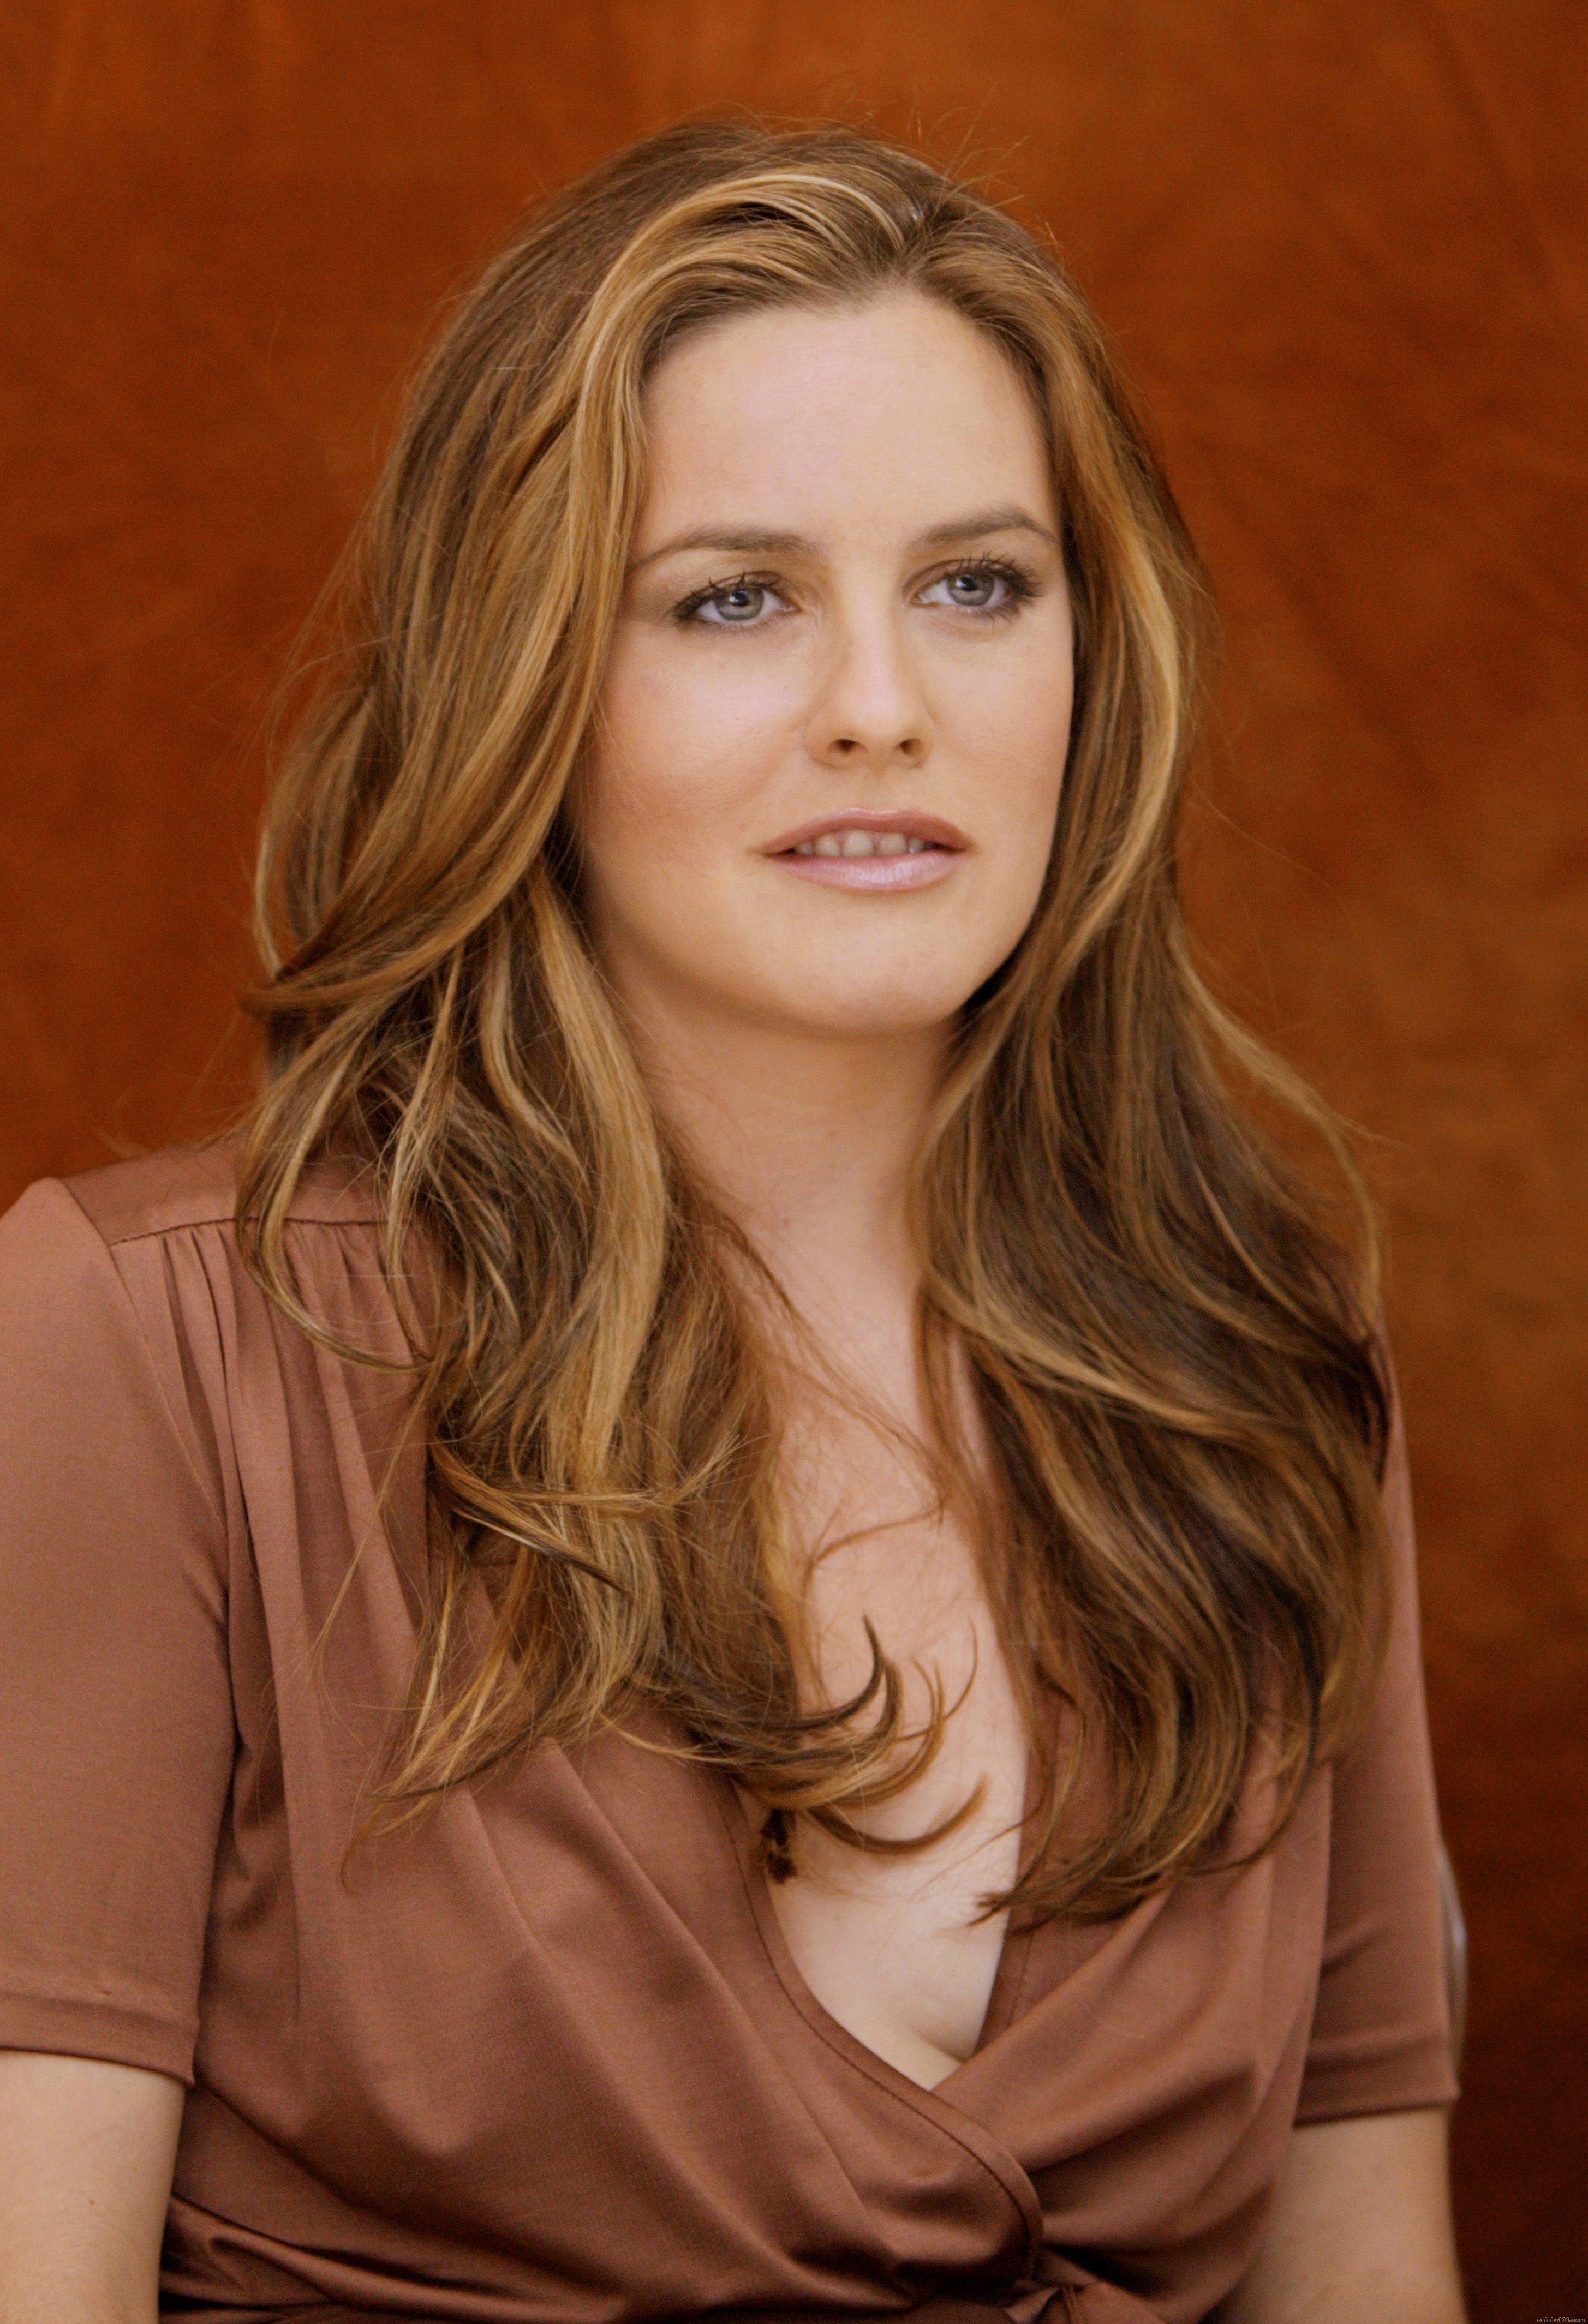 Alicia Silverstone Romance Hairstyles Pictures, Long Hairstyle 2013, Hairstyle 2013, New Long Hairstyle 2013, Celebrity Long Romance Hairstyles 2089